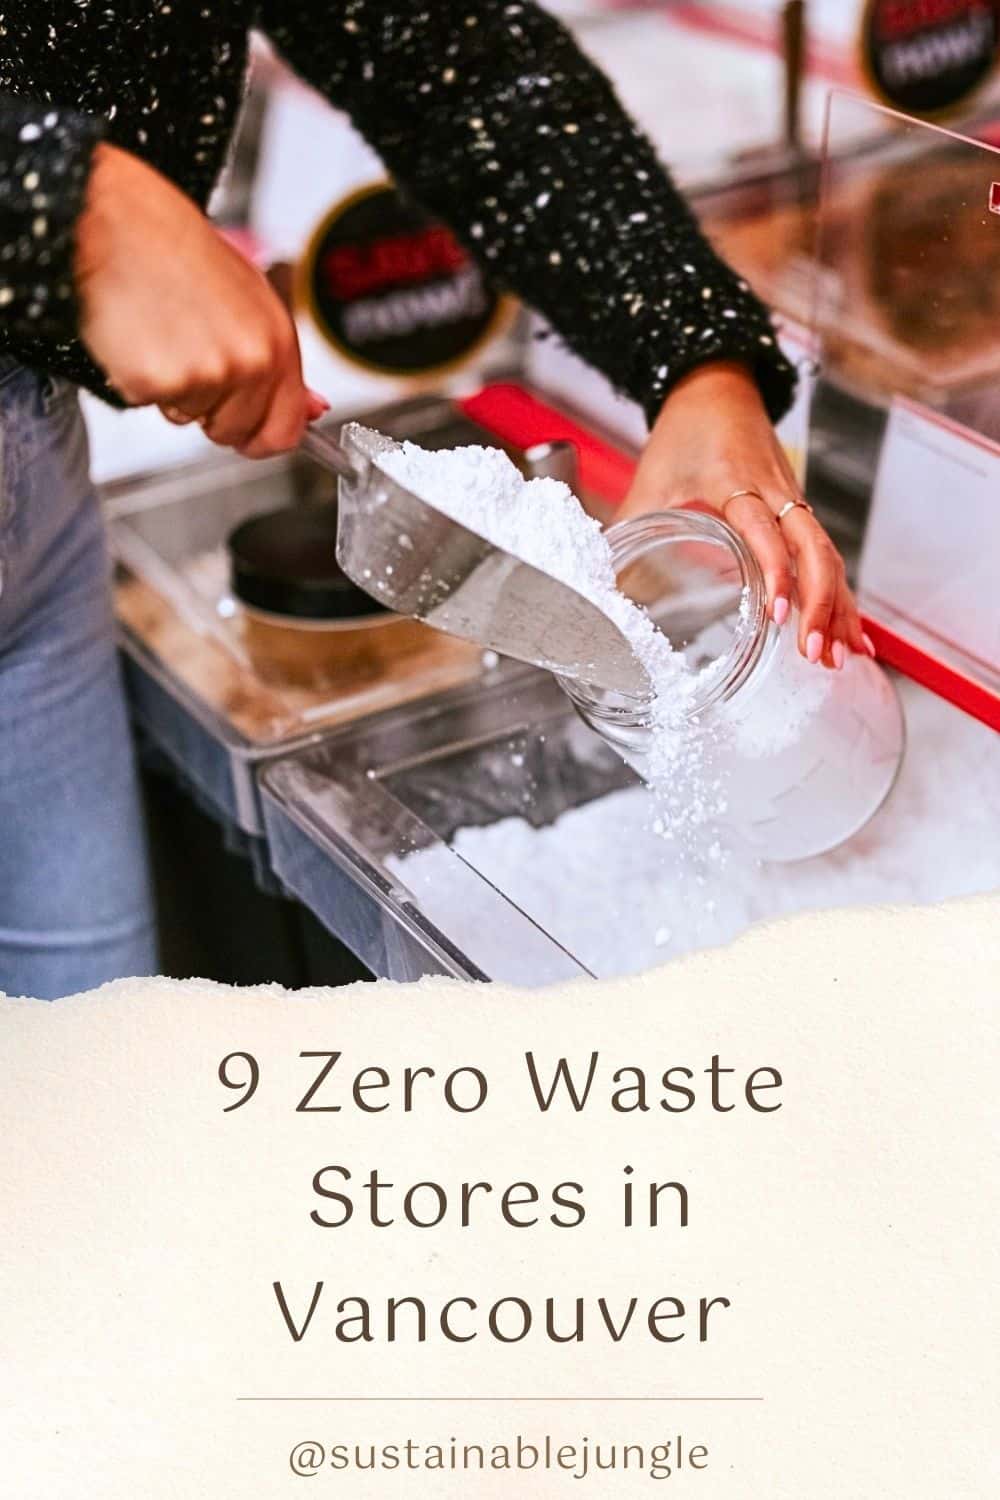 9 Vancouver Zero Waste Stores to Keep Beautiful British Columbia…Well, Beautiful Image by Bulk Barn #zerowastestoreVancouver #bestzerowastestoresVancouver #bulkstoresVancouver #refillstoreVancouver #zerowasteshopping #sustainablejungle